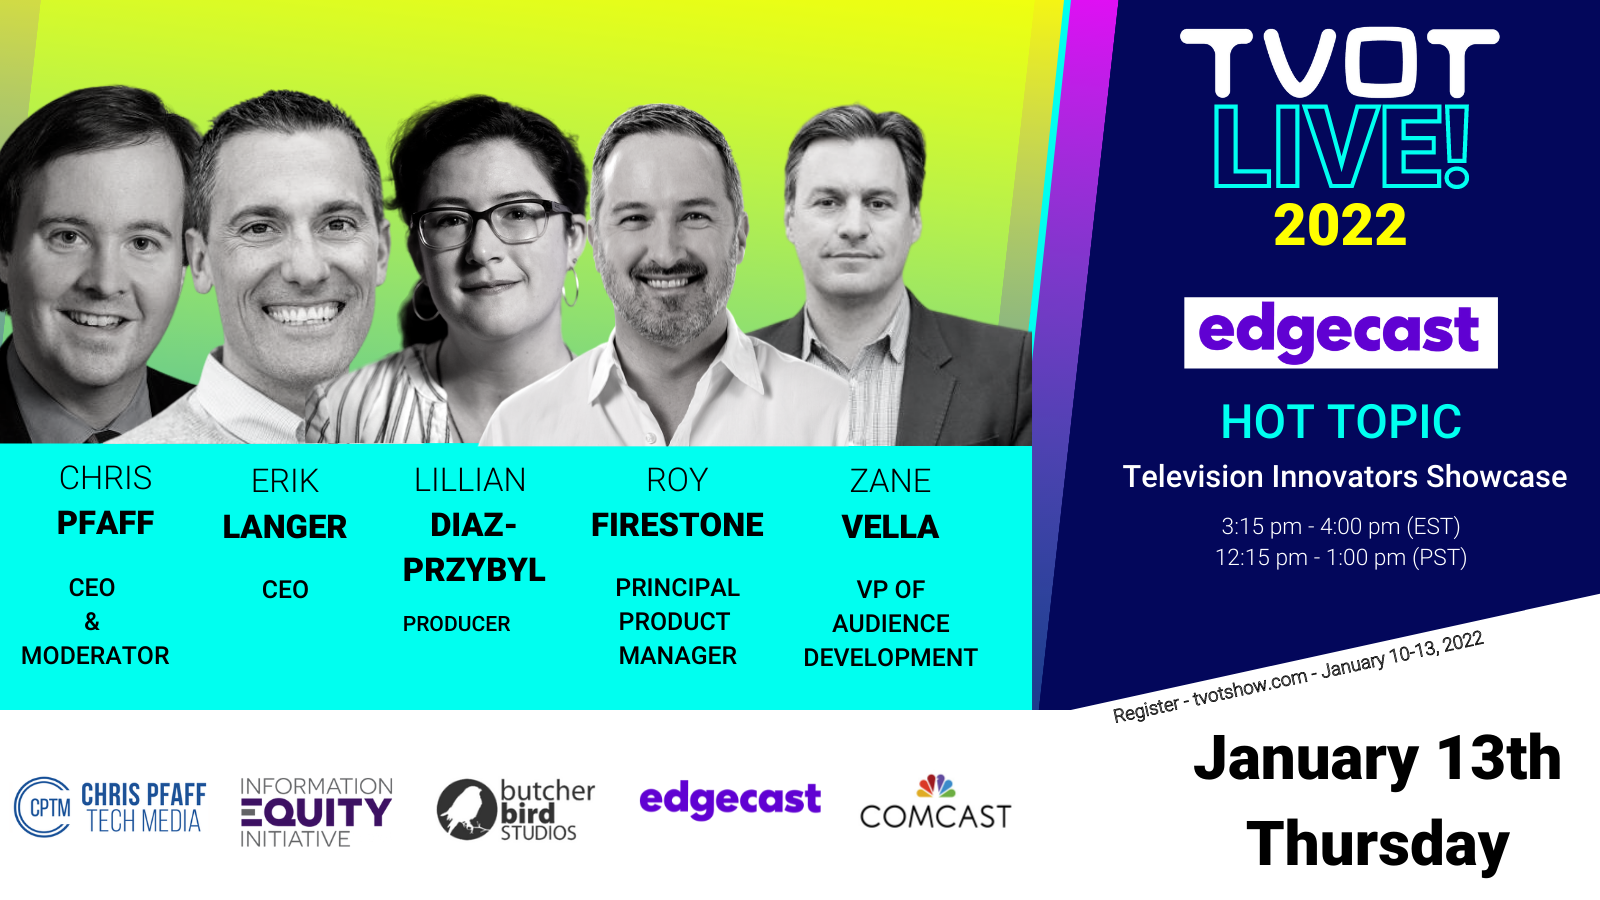 Innovating through new technologies in television: TVOT LIVE! 2022